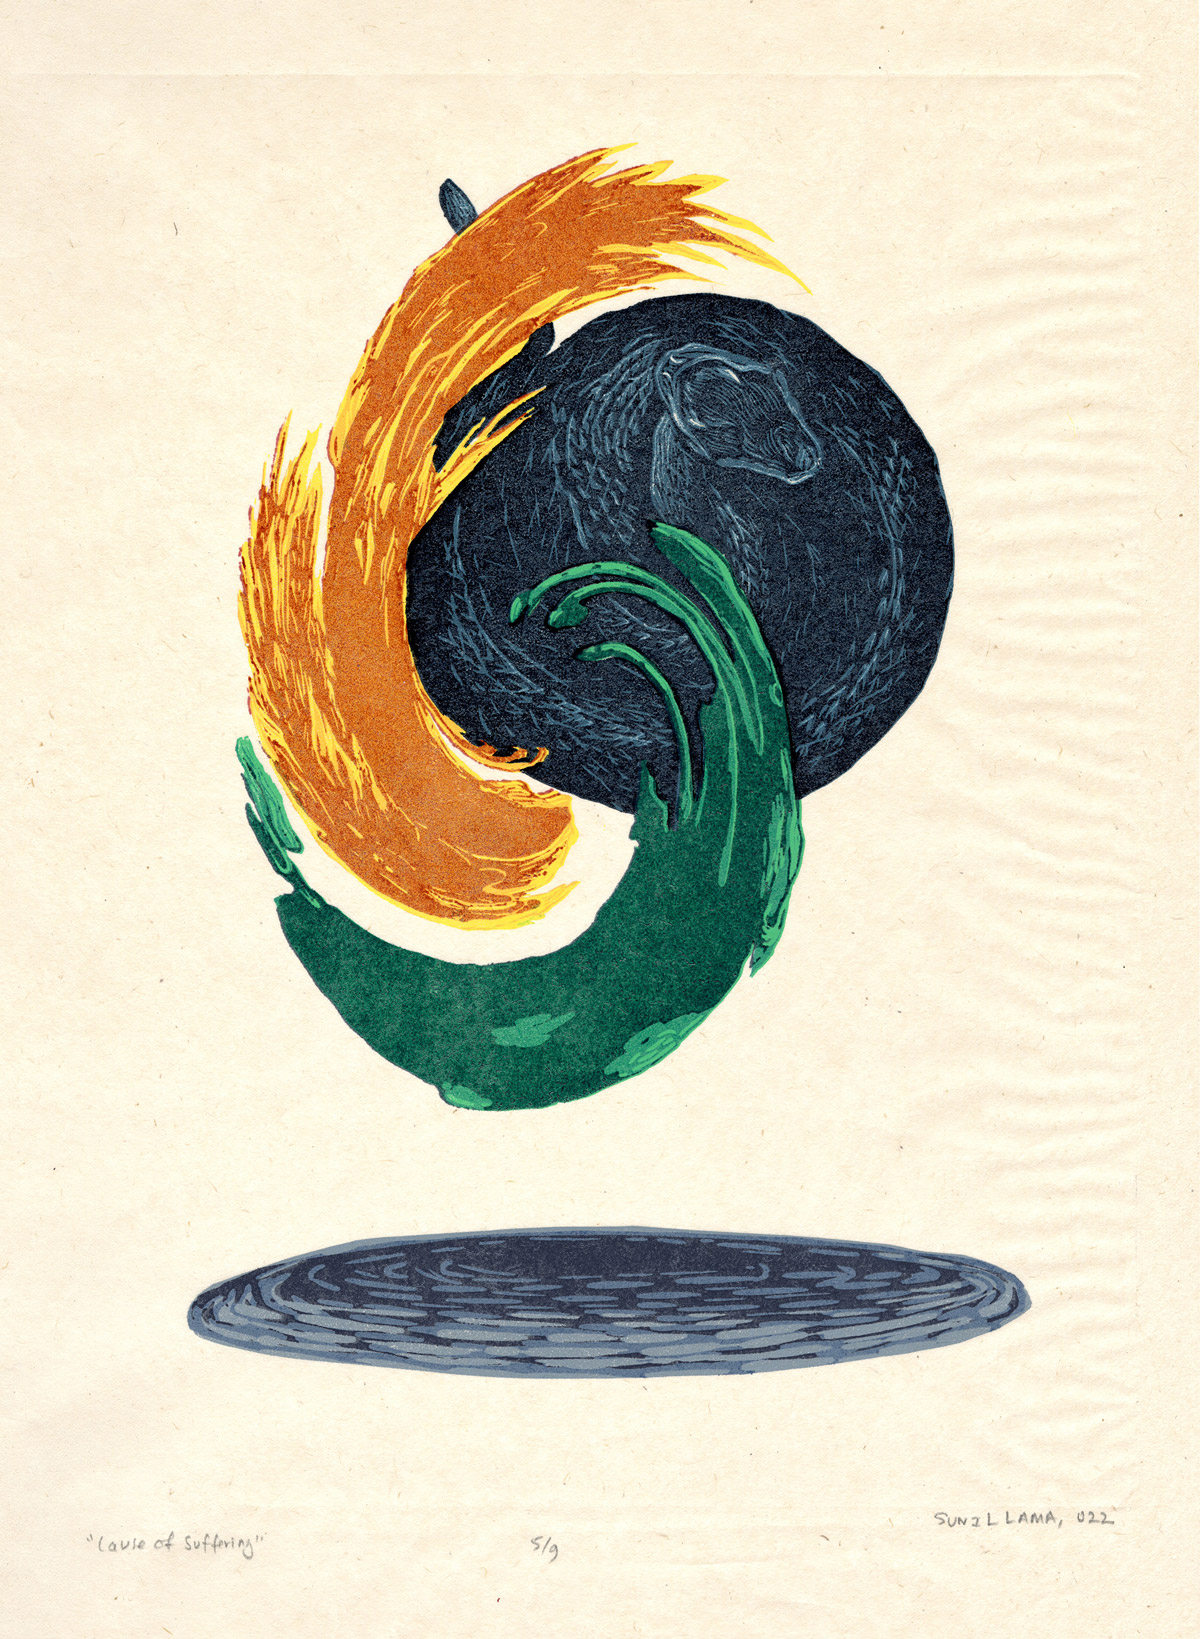 On the left side yellow swirl of a rooster, green swirl image of a pig against a gray background.